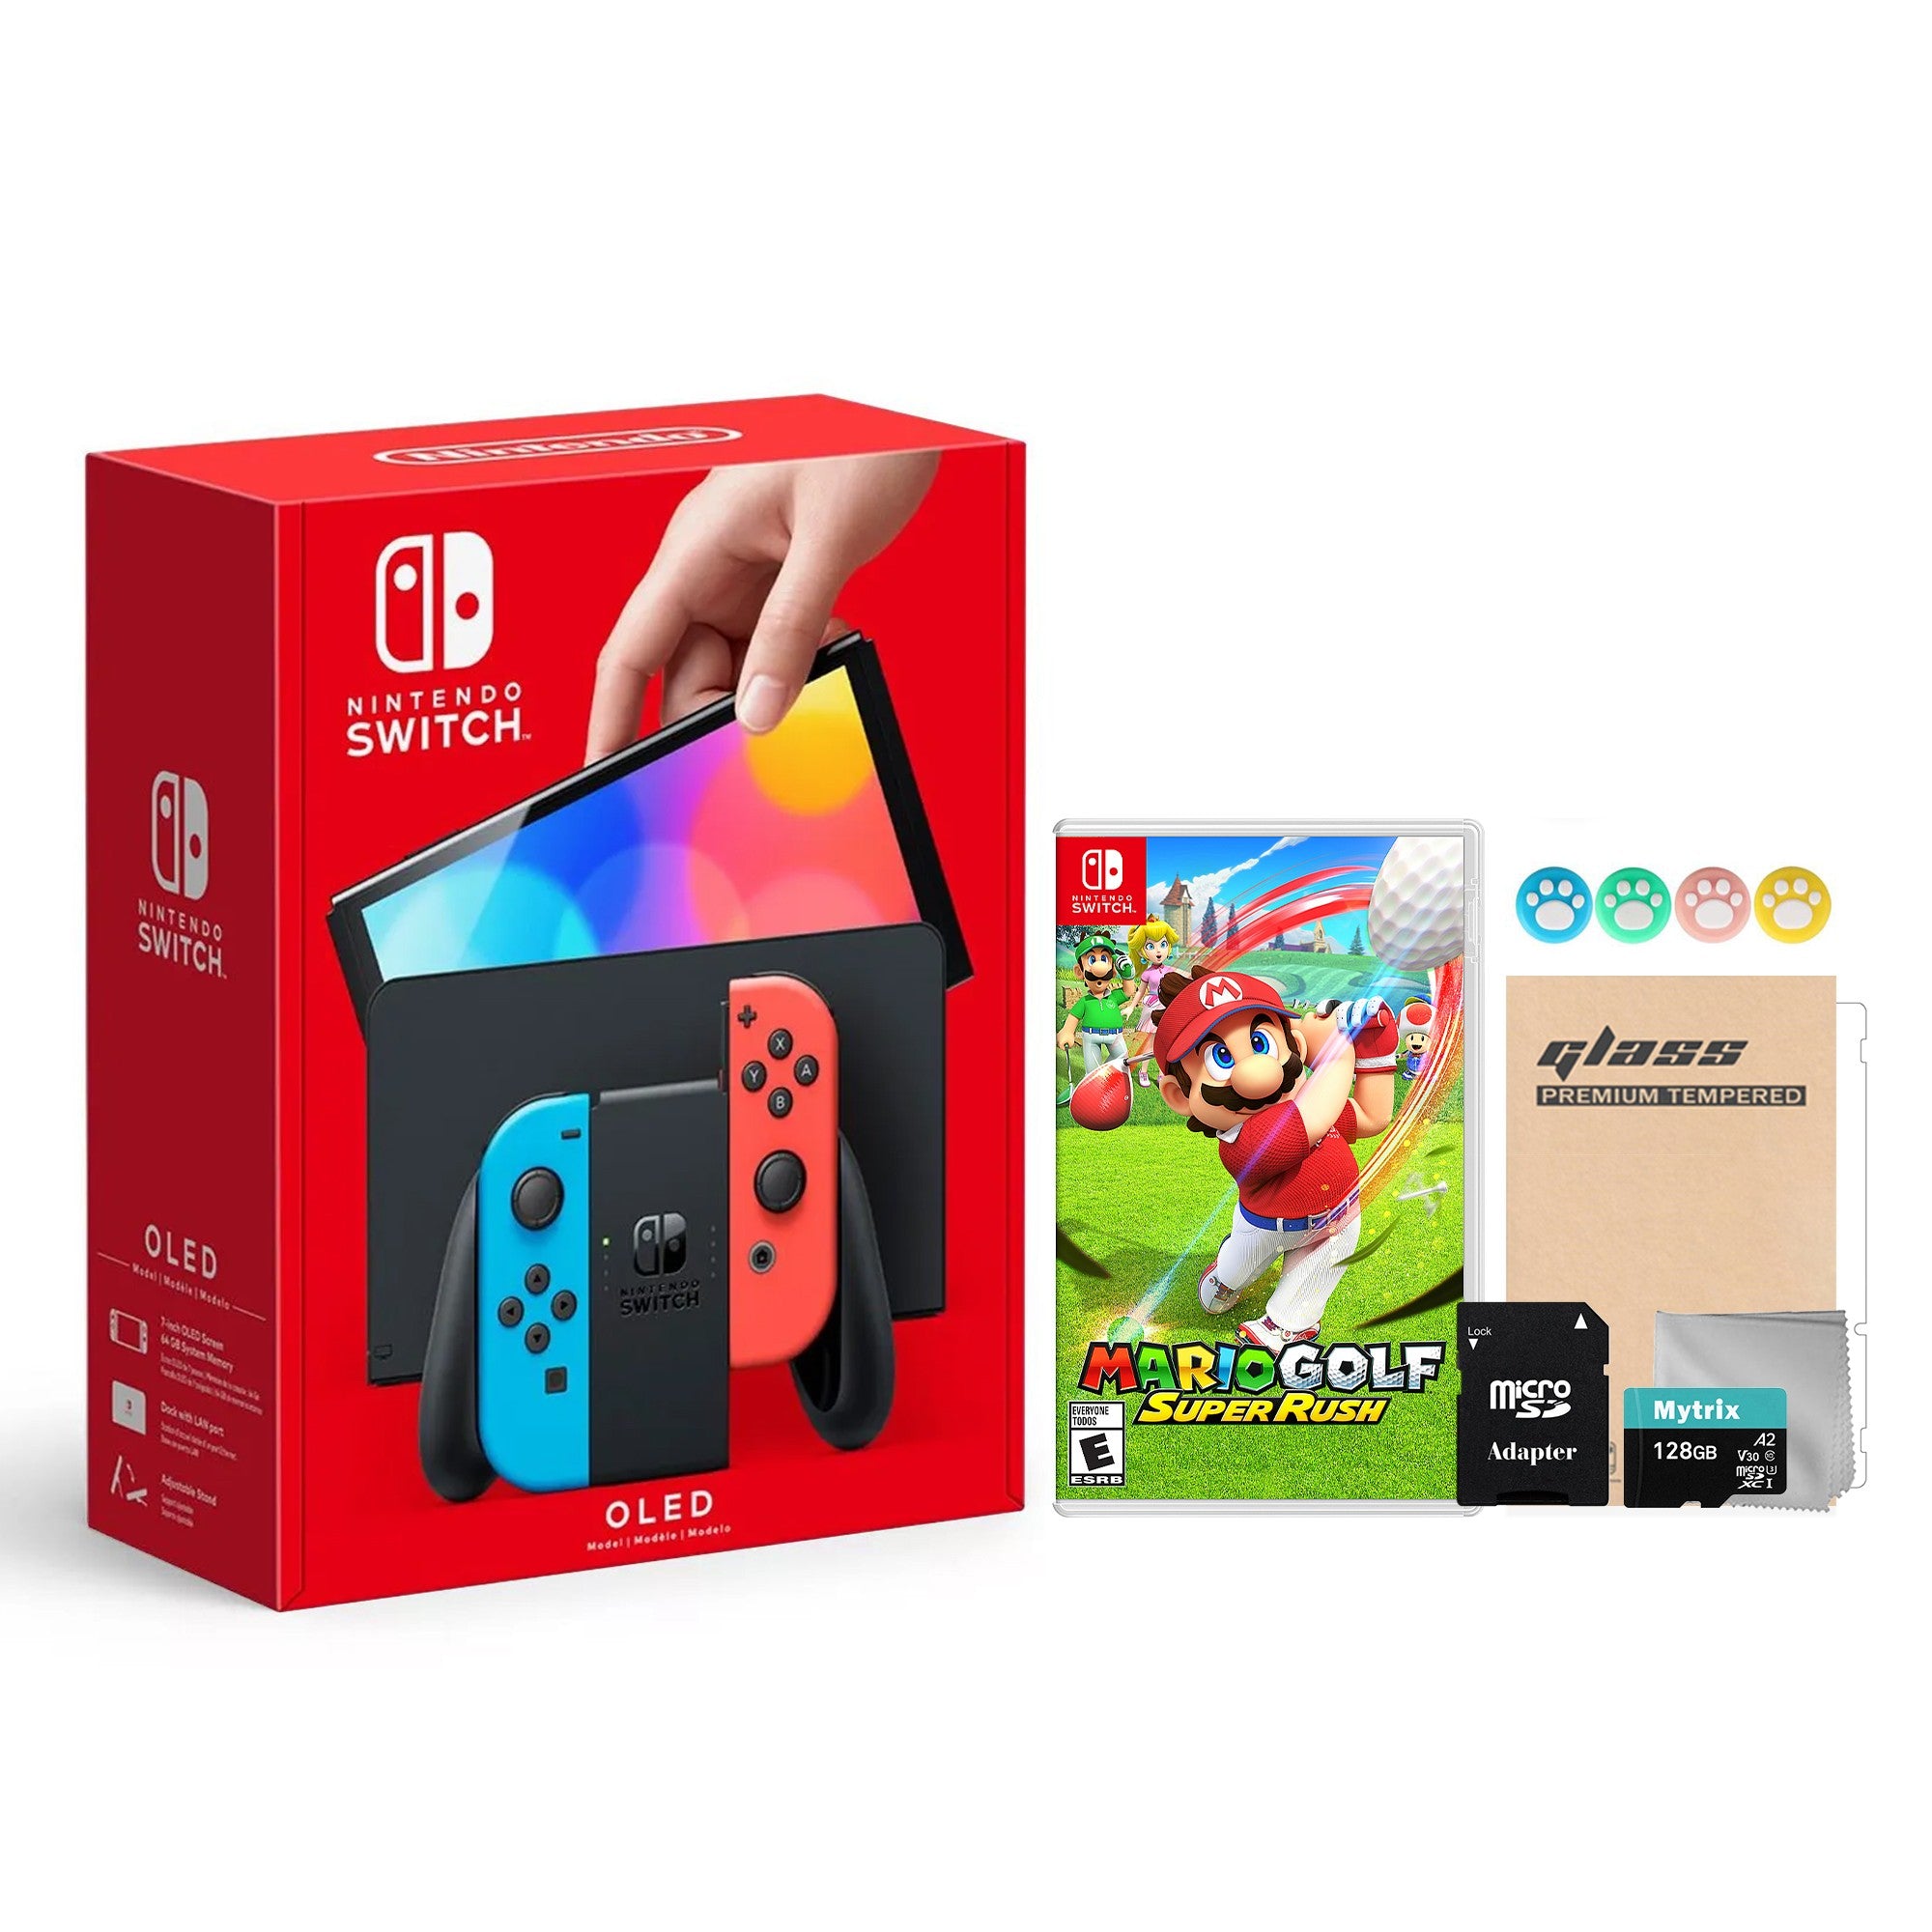 2022 New Nintendo Switch OLED Model Neon Red & Blue Joy Con 64GB Console HD Screen & LAN-Port Dock with Mario Golf: Super Rush, Mytrix 128GB MicroSD Card and Accessories